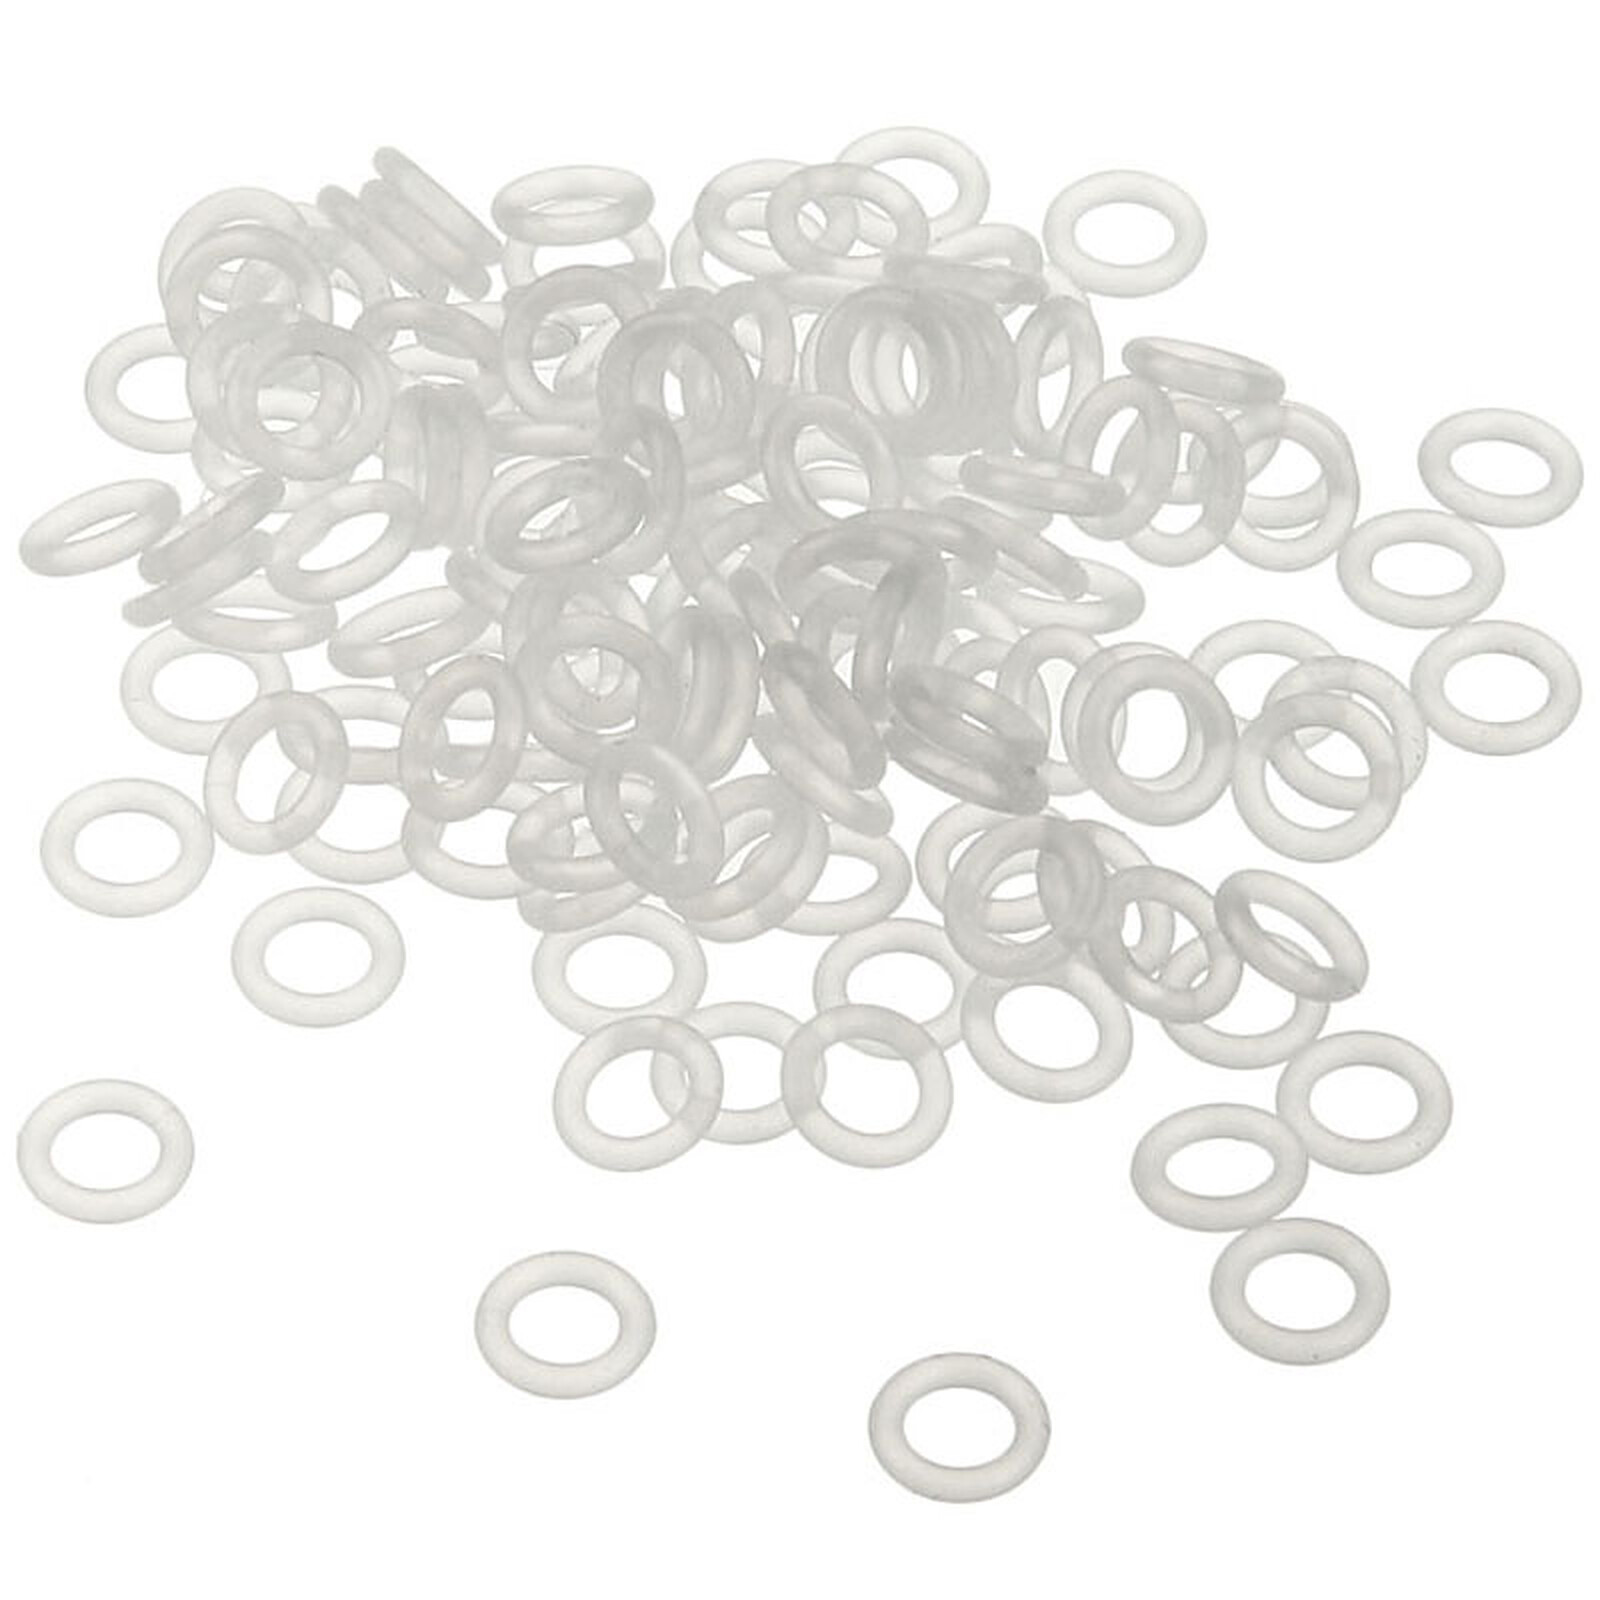 beeld ga zo door enthousiasme O-Rings for Cherry MX mechanical switches (125 per set) - clear - Keyboard  Generic on LDLC